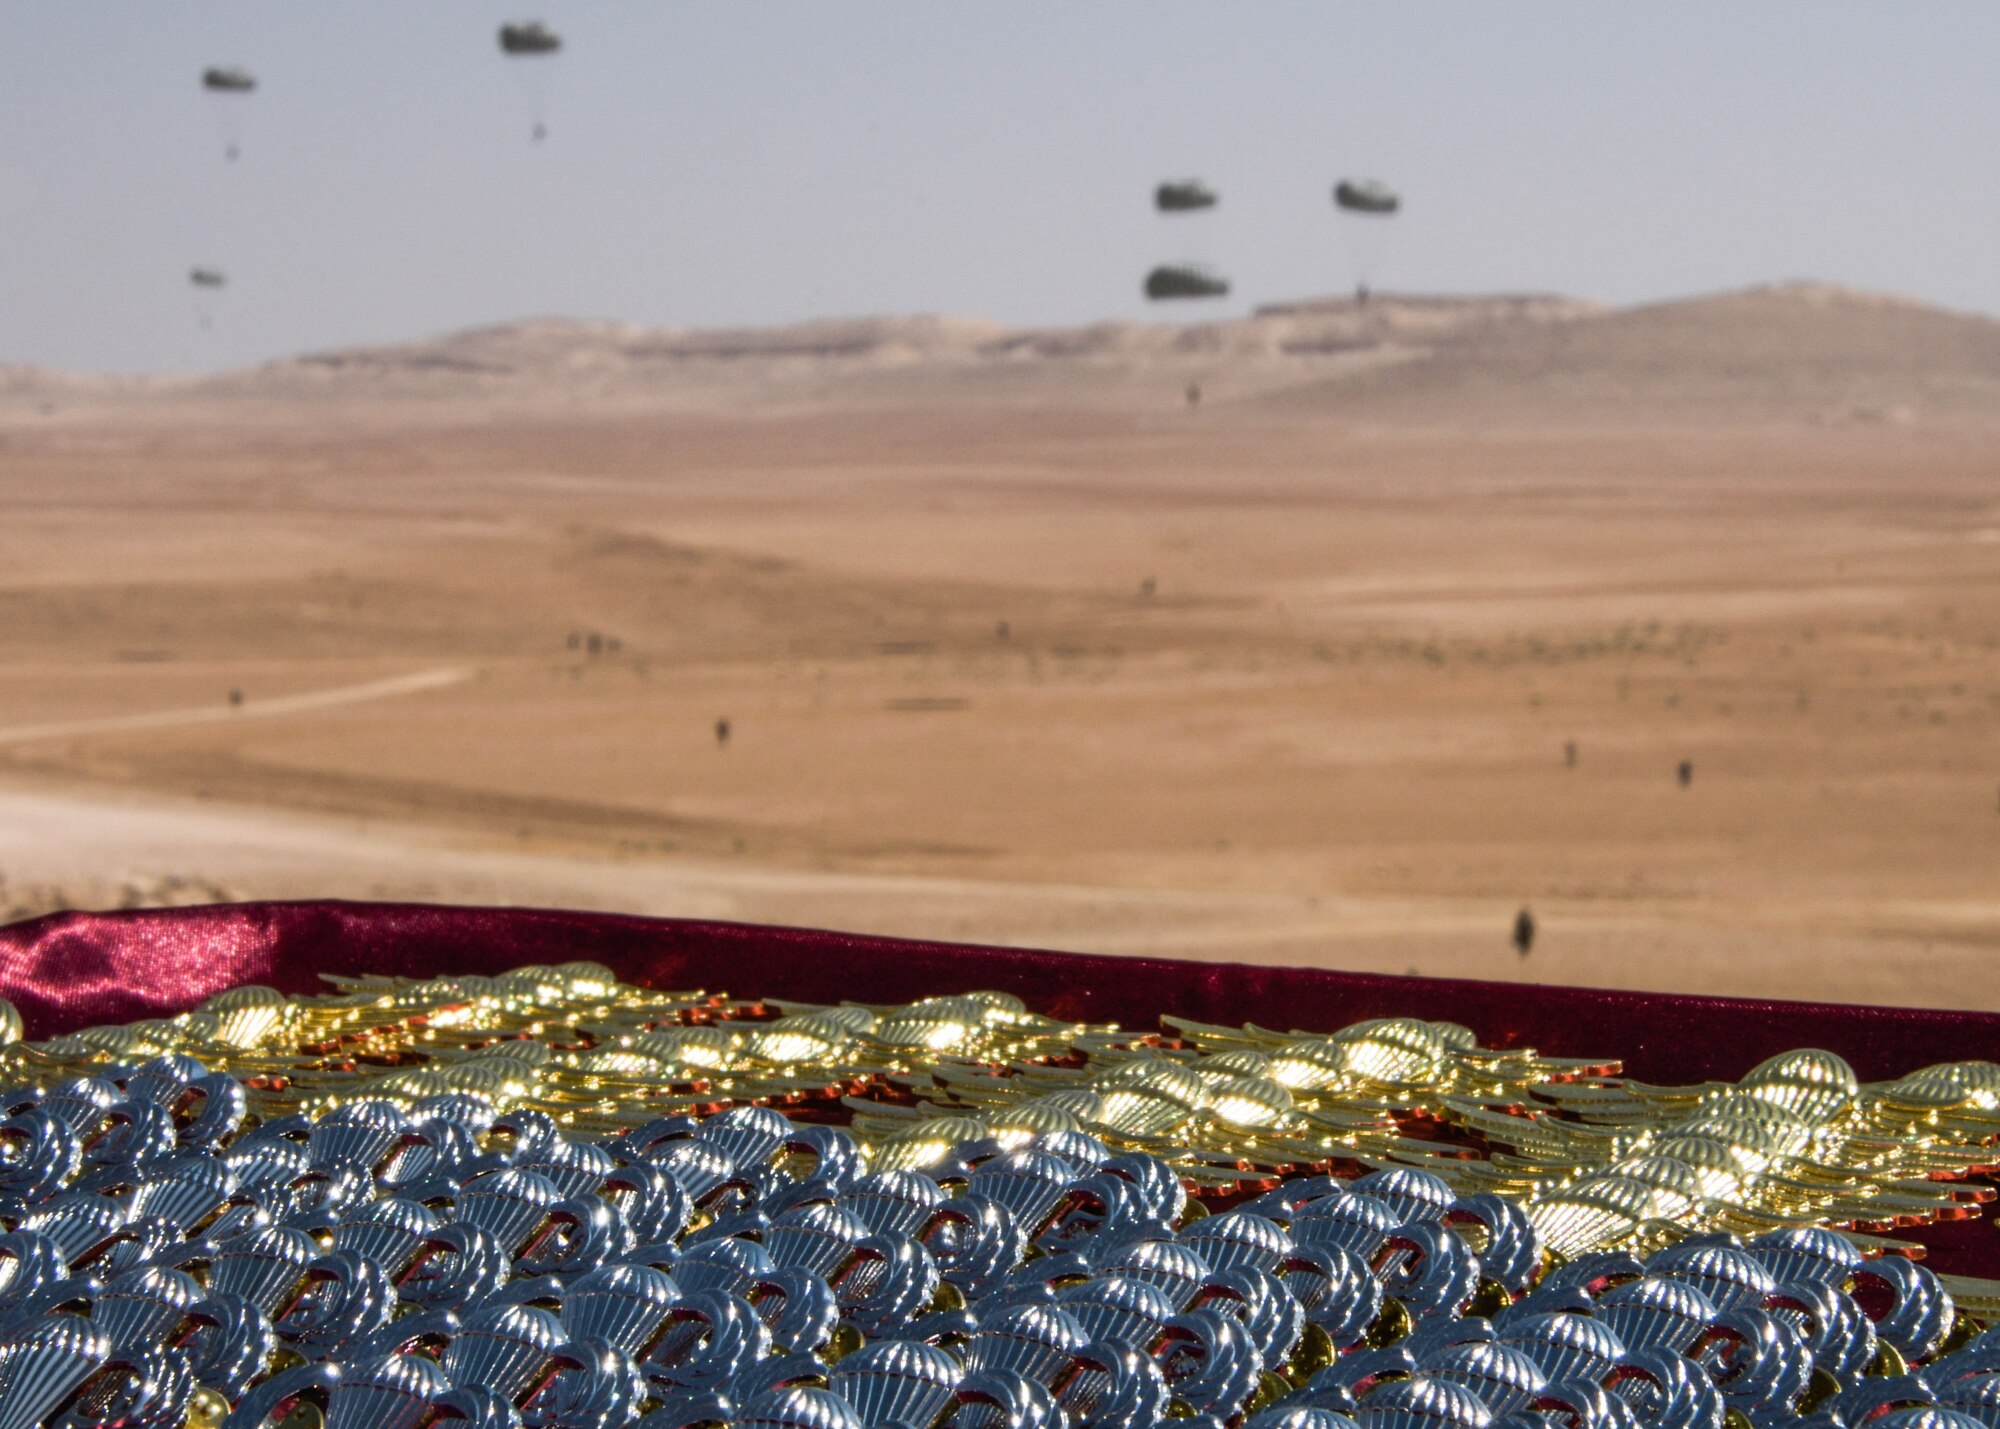 A set of jump wings prepared for the pinning ceremony that takes place after the Friendship Jump remains in focus as the jumper’s parachute to the Jordanian ground during Exercise Eager Lion on Sept. 5, 2019.